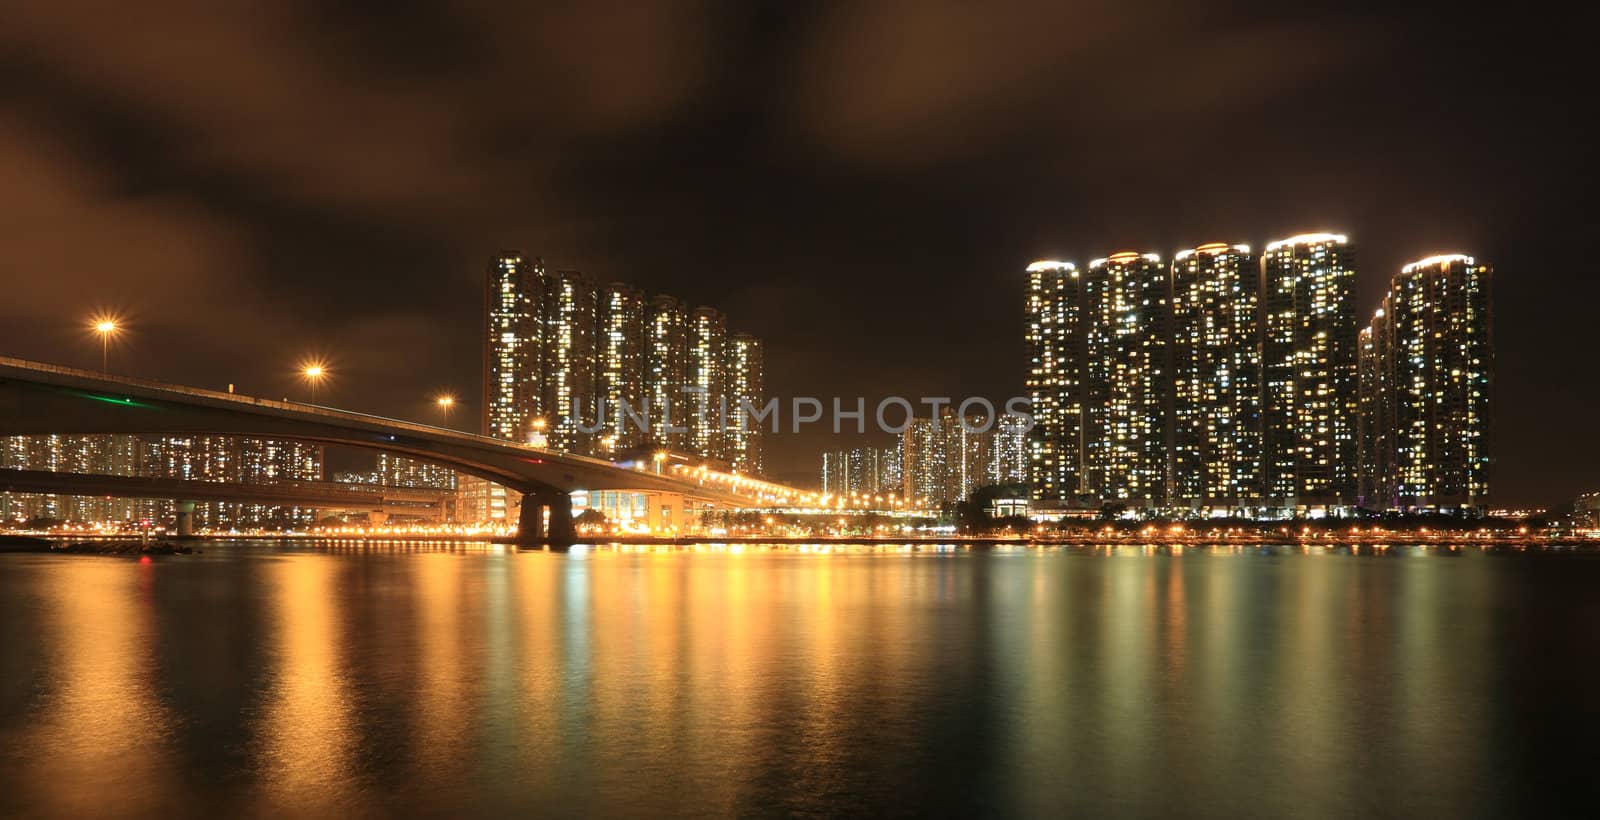 Business Towers and Residential Apartment Buildings in Hong Kong at night by leungchopan